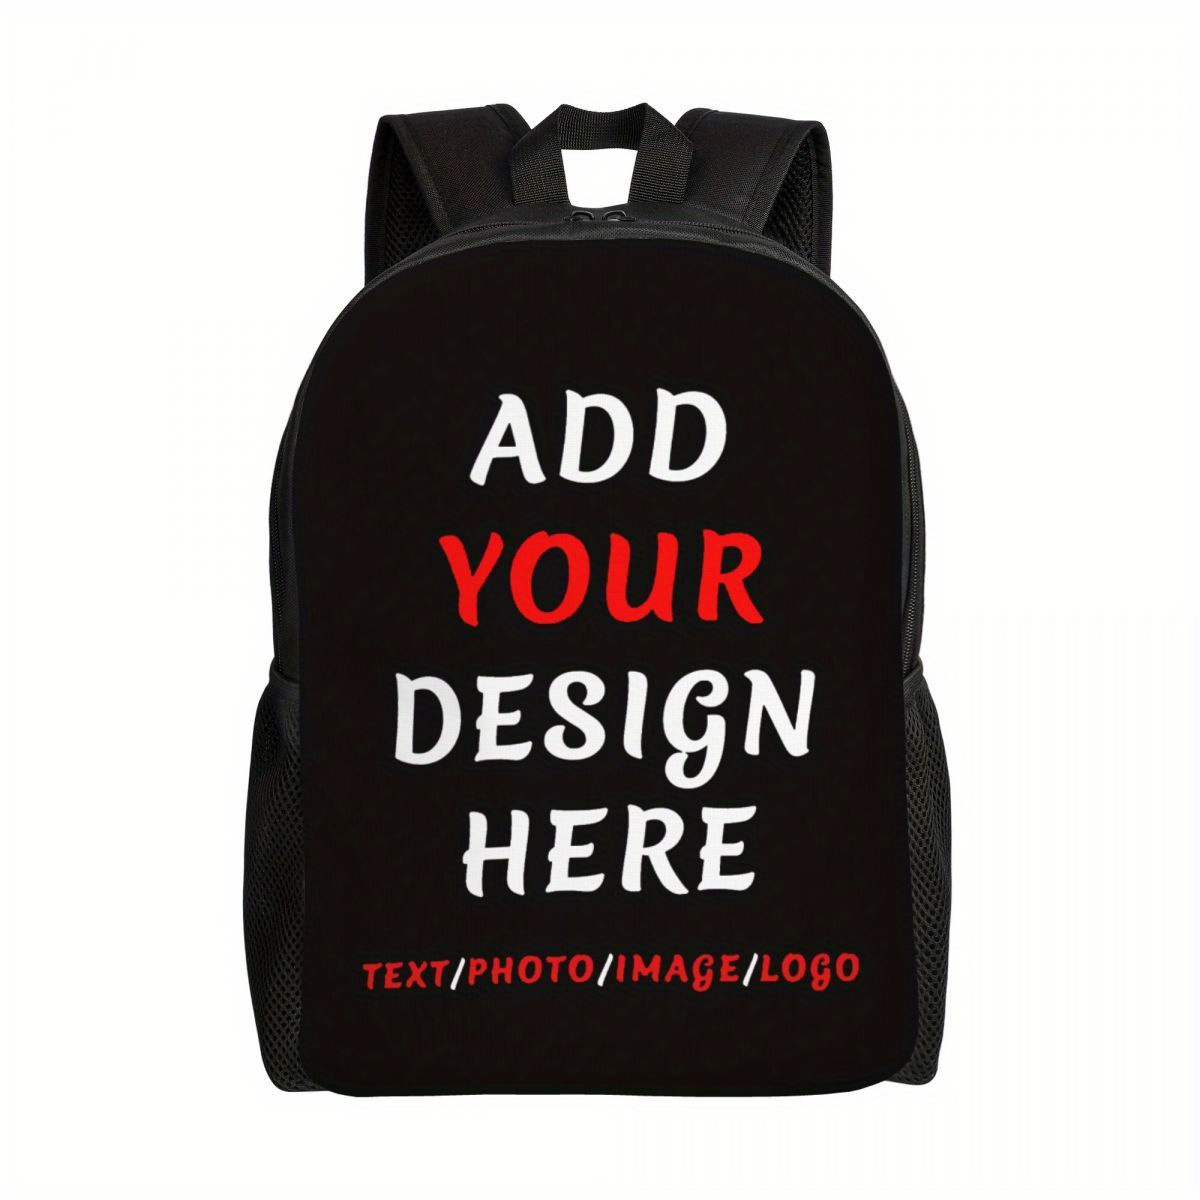 

Personalized Custom Backpack For Teens: Add Your Photo/text - Perfect For School Or Travel